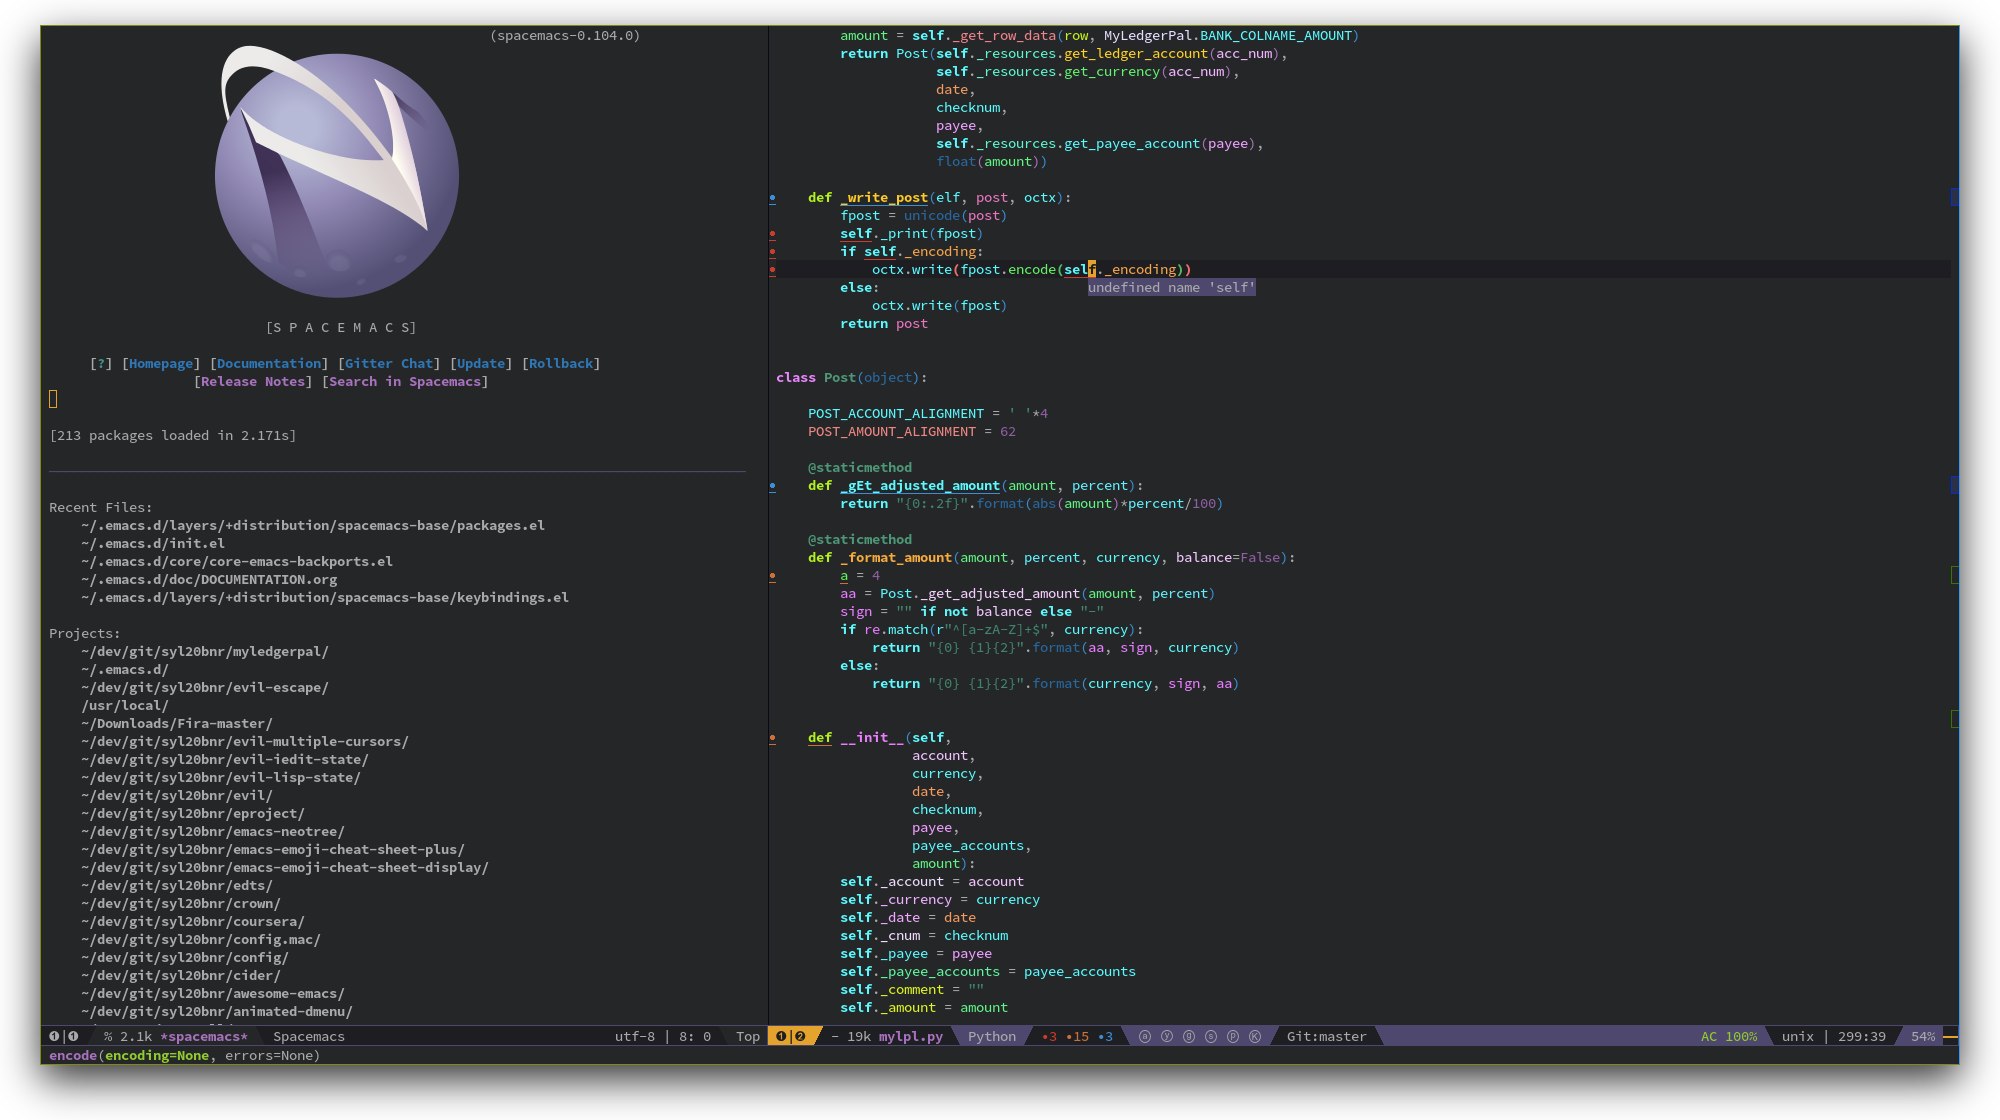 /TakeV/spacemacs/media/commit/5d04465c6968303eb3699a4a78a8536839f66014/doc/img/spacemacs-python.png